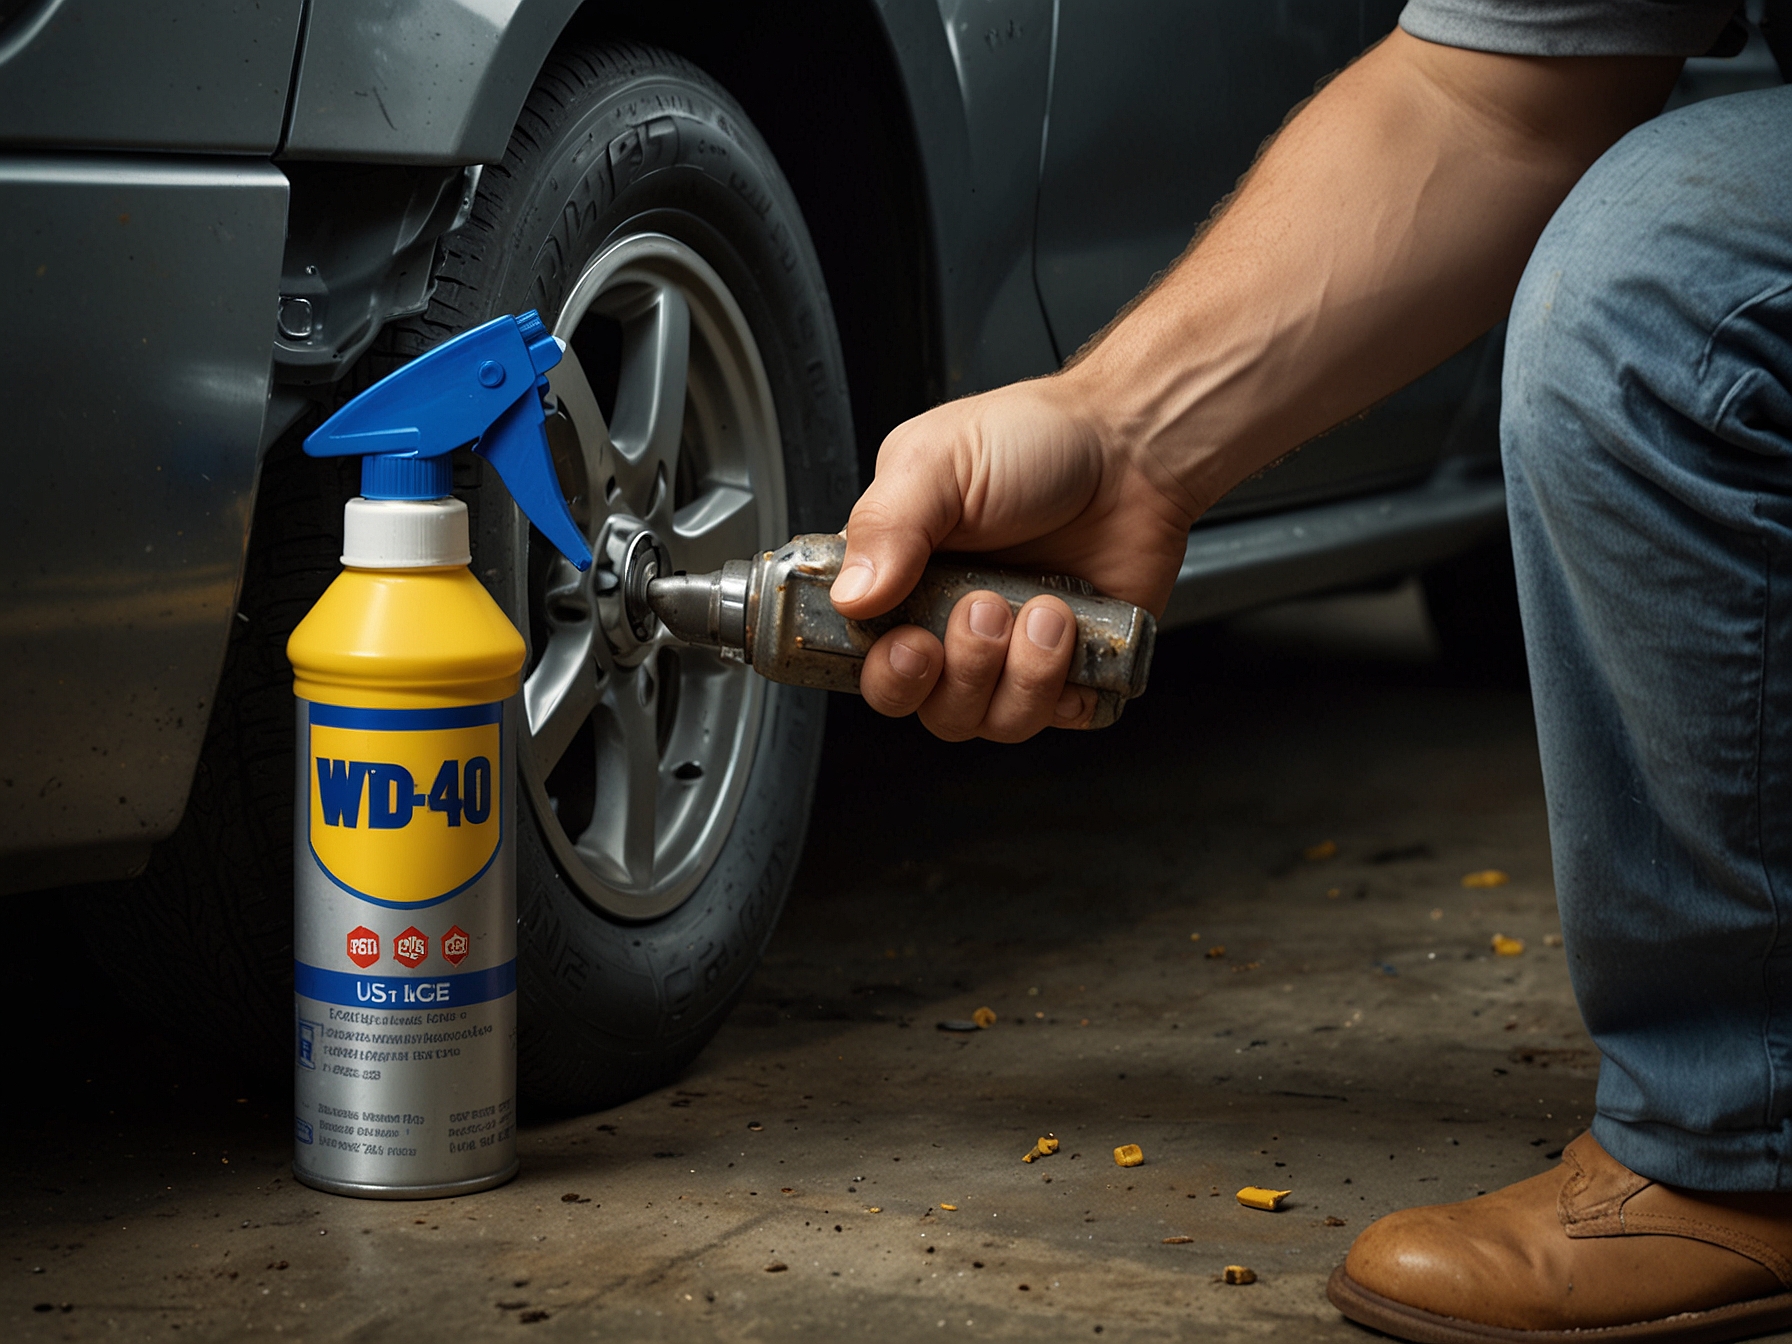 Close-up of a person applying WD-40 to the car's undercarriage and door hinges, showcasing the spray's rust-prevention qualities as recommended by the RAC.